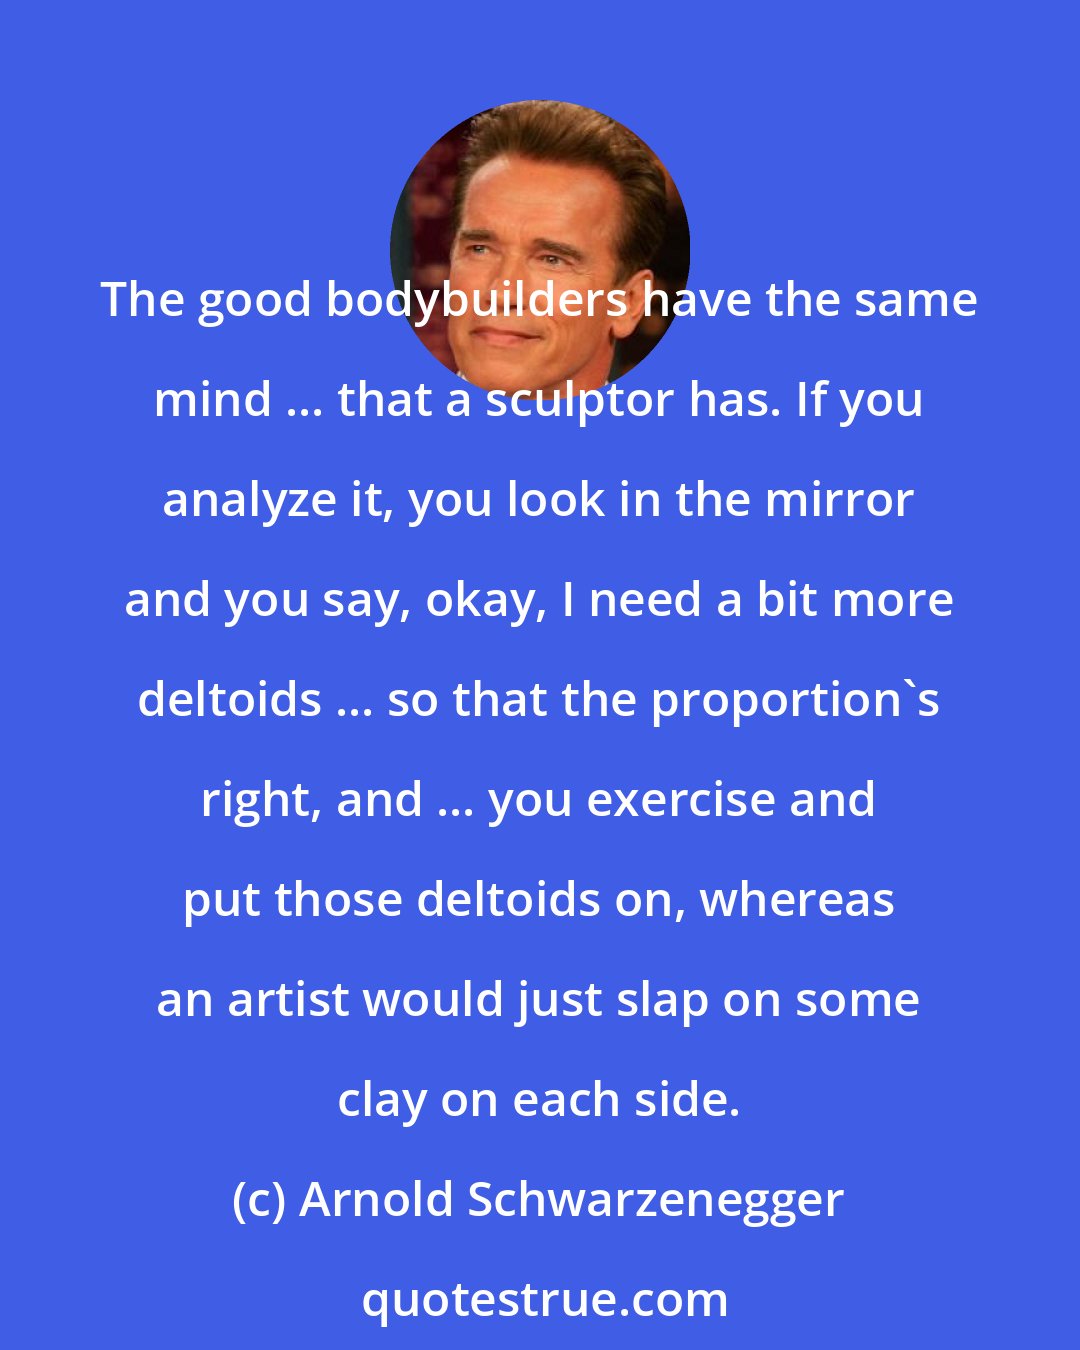 Arnold Schwarzenegger: The good bodybuilders have the same mind ... that a sculptor has. If you analyze it, you look in the mirror and you say, okay, I need a bit more deltoids ... so that the proportion's right, and ... you exercise and put those deltoids on, whereas an artist would just slap on some clay on each side.